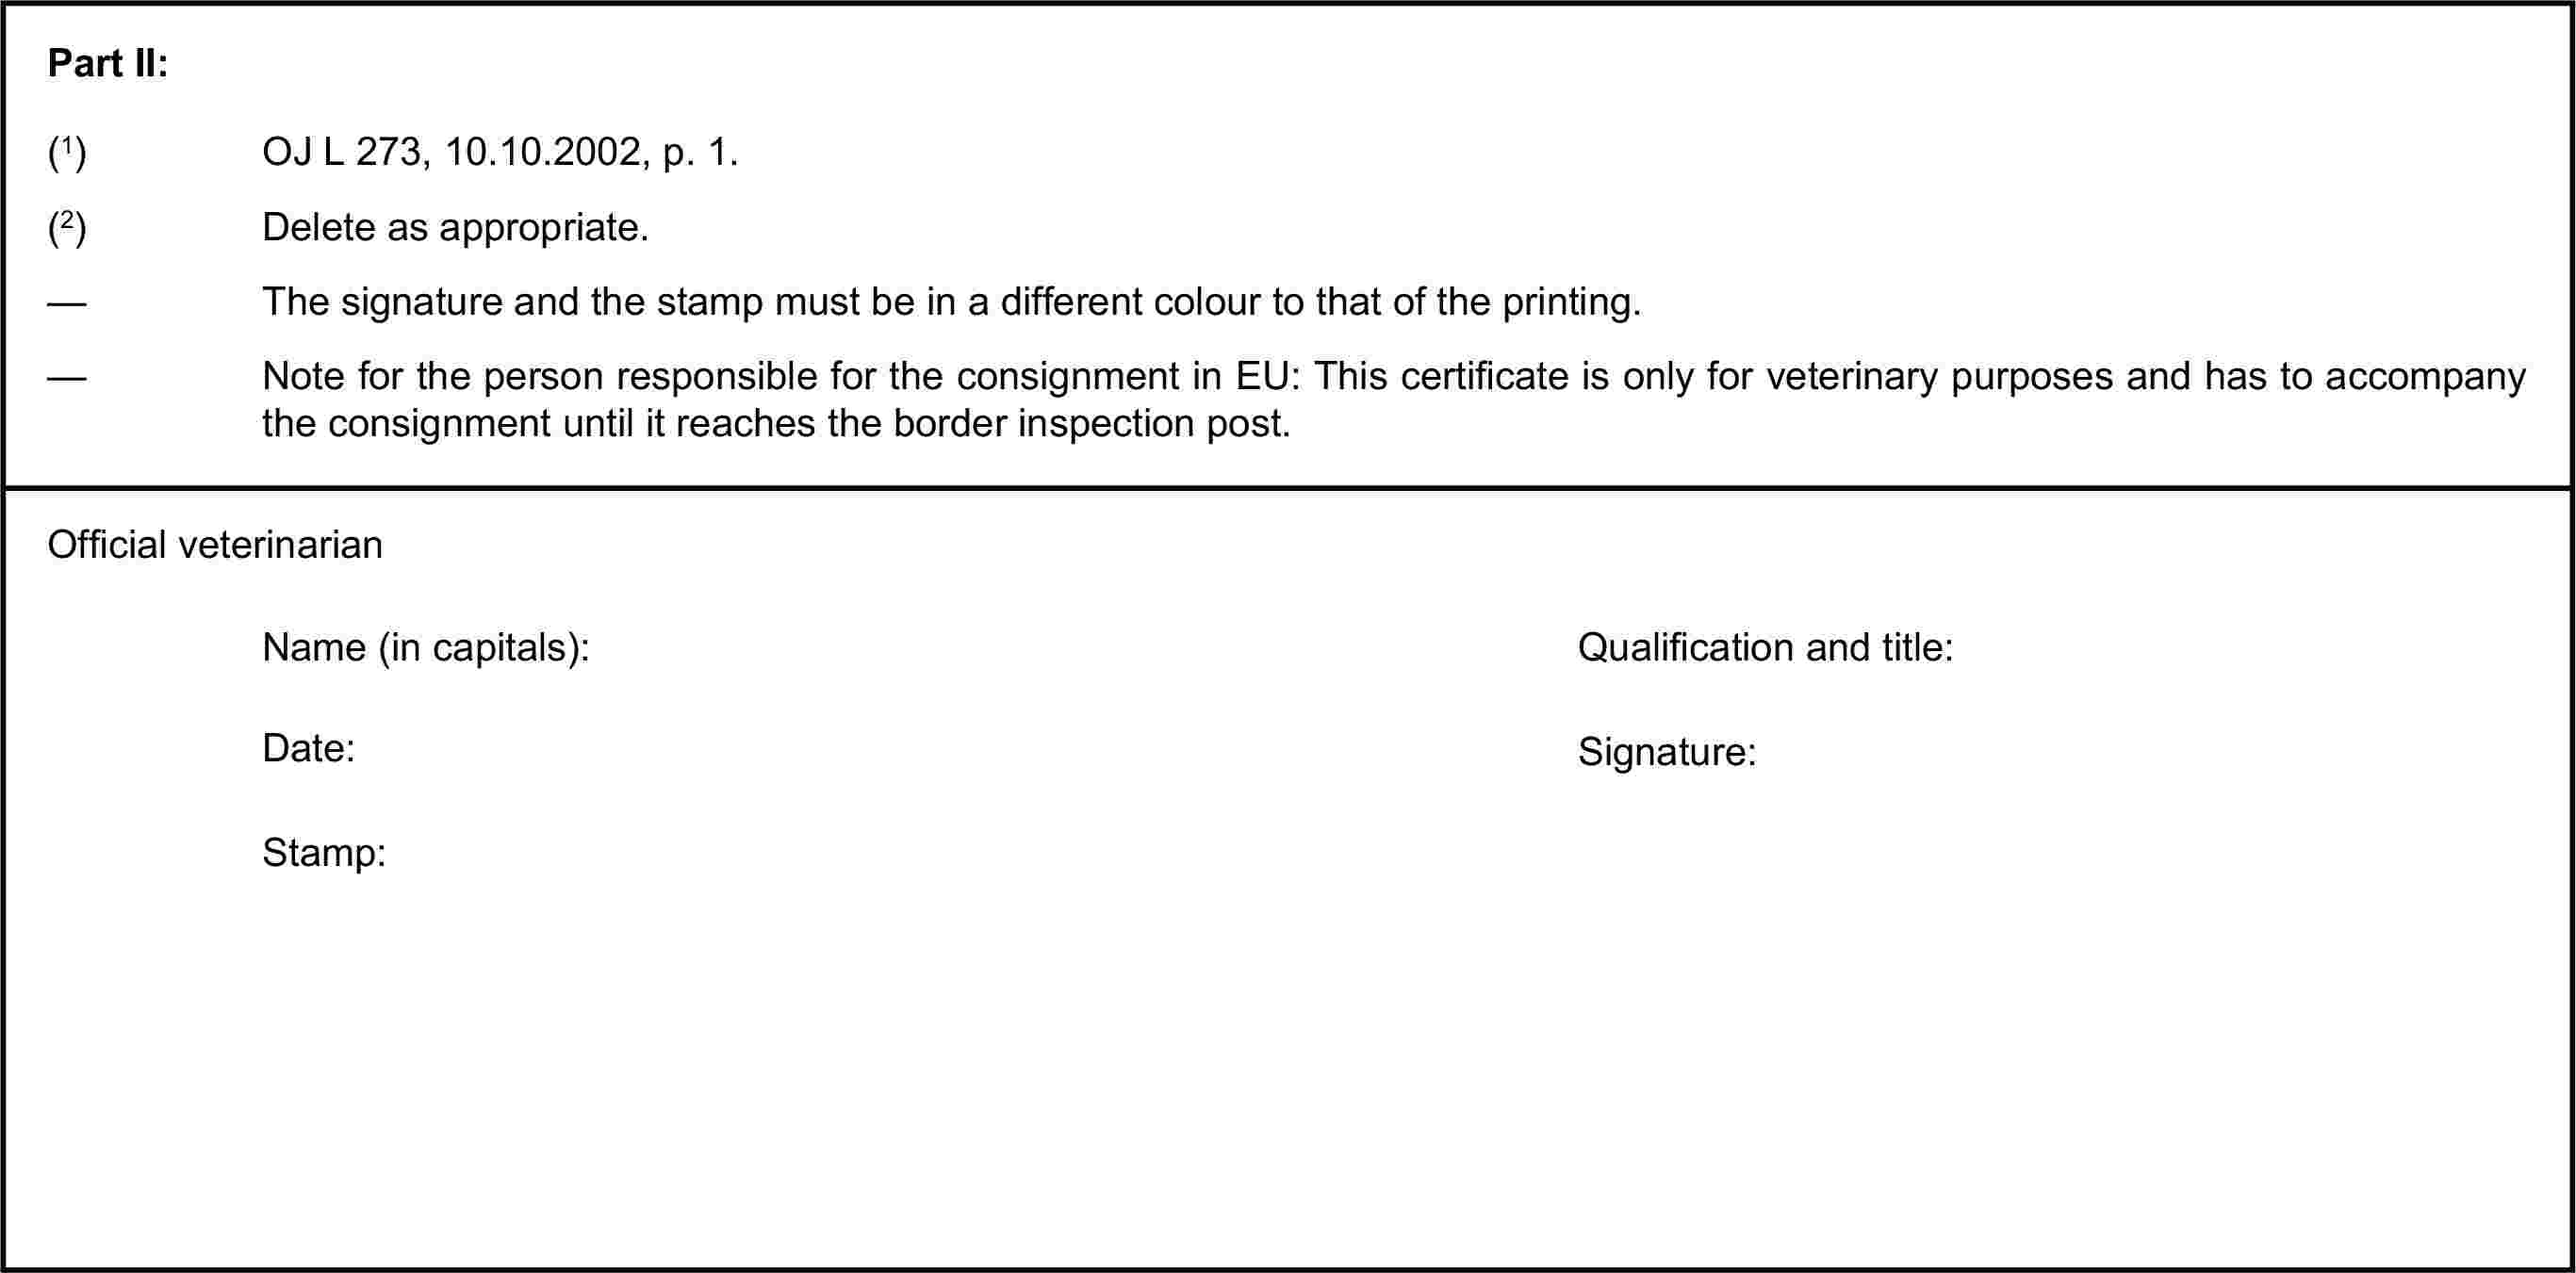 Part II:(1) OJ L 273, 10.10.2002, p. 1.(2) Delete as appropriate.— The signature and the stamp must be in a different colour to that of the printing.— Note for the person responsible for the consignment in EU: This certificate is only for veterinary purposes and has to accompany the consignment until it reaches the border inspection post.Official veterinarianName (in capitals):Qualification and title:Date:Signature:Stamp: